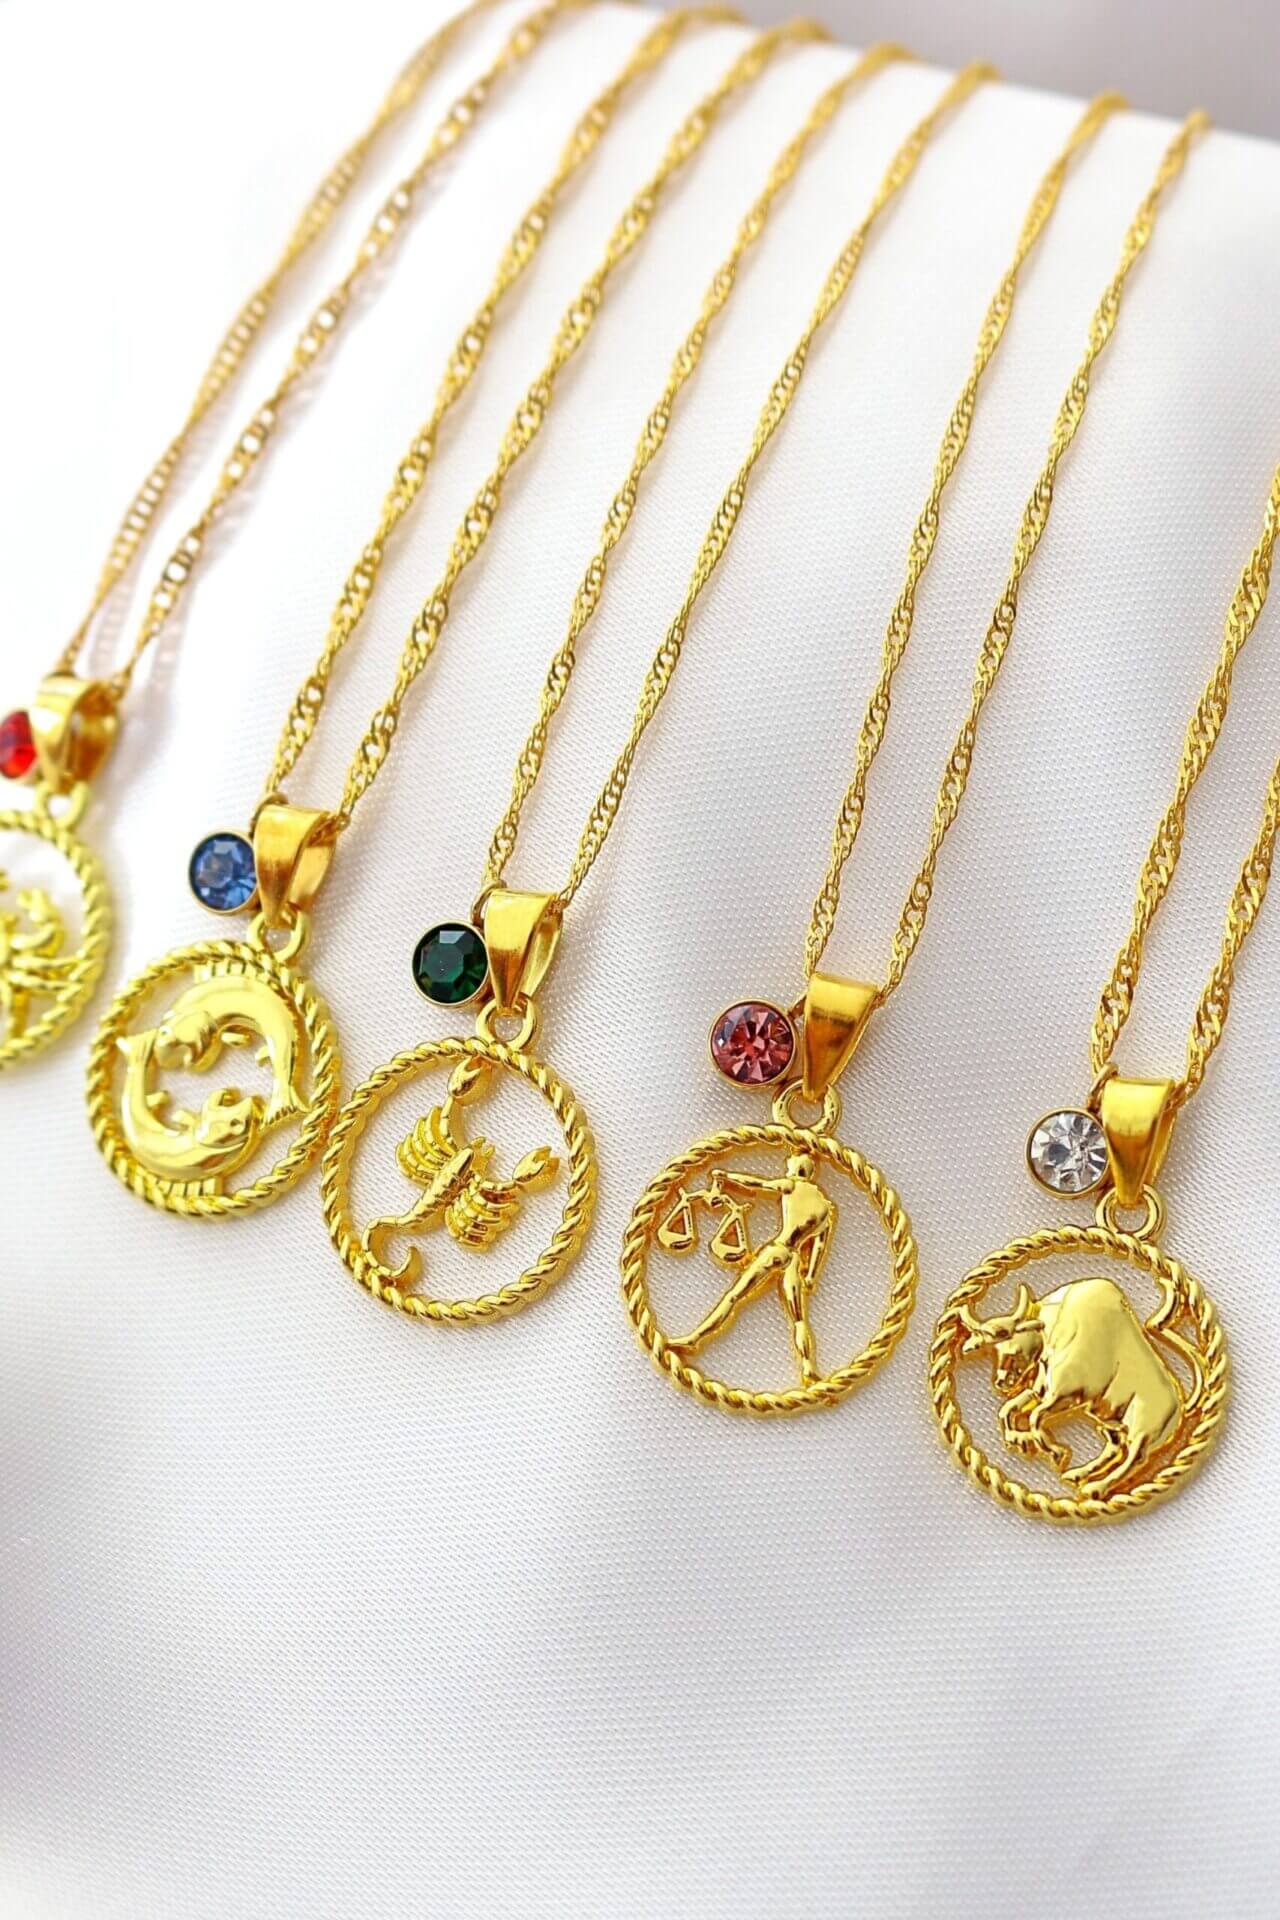 Jewels Obsession Zodiac Virgo Necklace 14K Yellow Gold-plated 925 Silver Zodiac Virgo Pendant with 30 Necklace